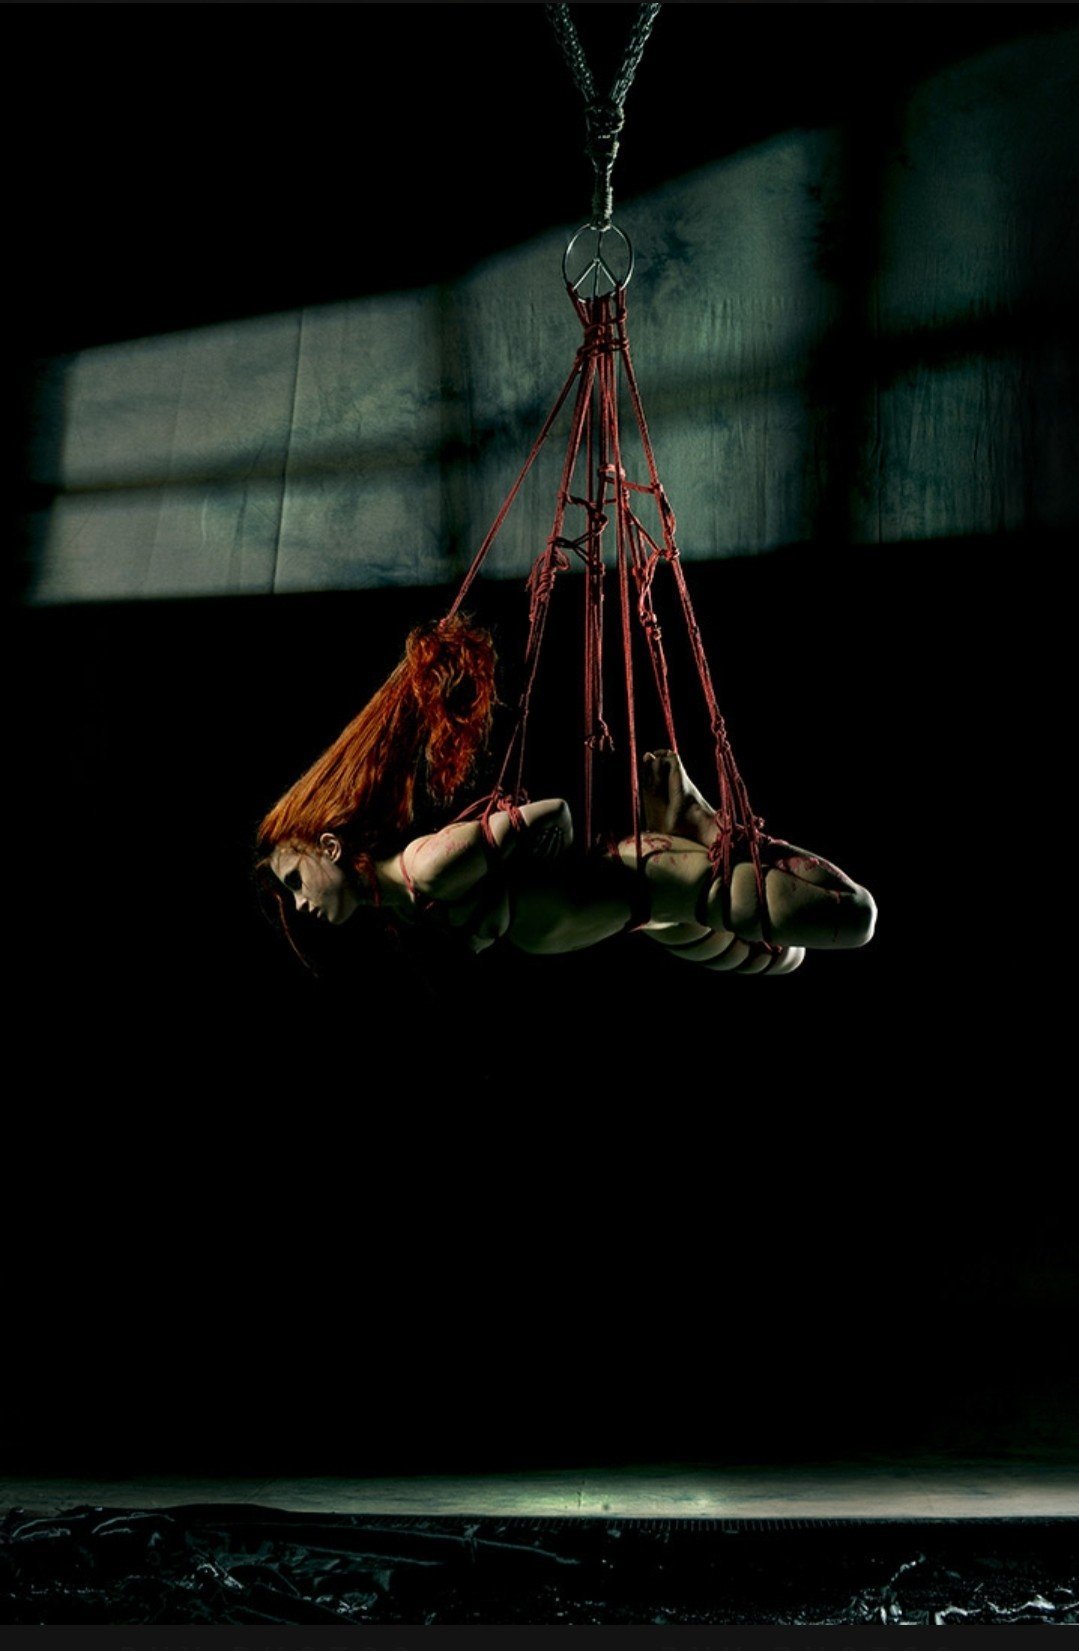 Watch the Photo by Sumles with the username @Sumles, posted on July 9, 2023. The post is about the topic Slavegirl. and the text says '#slavegirl #bondage #tied #tiedgirl #shibari #artistic #suspended #femininebeauty #sensual #perfect #fly #ropebunny #submissive #slave #bdsm #longhair #beautiful #beauty #naked #helpless #sub  #puppet #girl #undressed #onherknees #roman #woodhorse..'